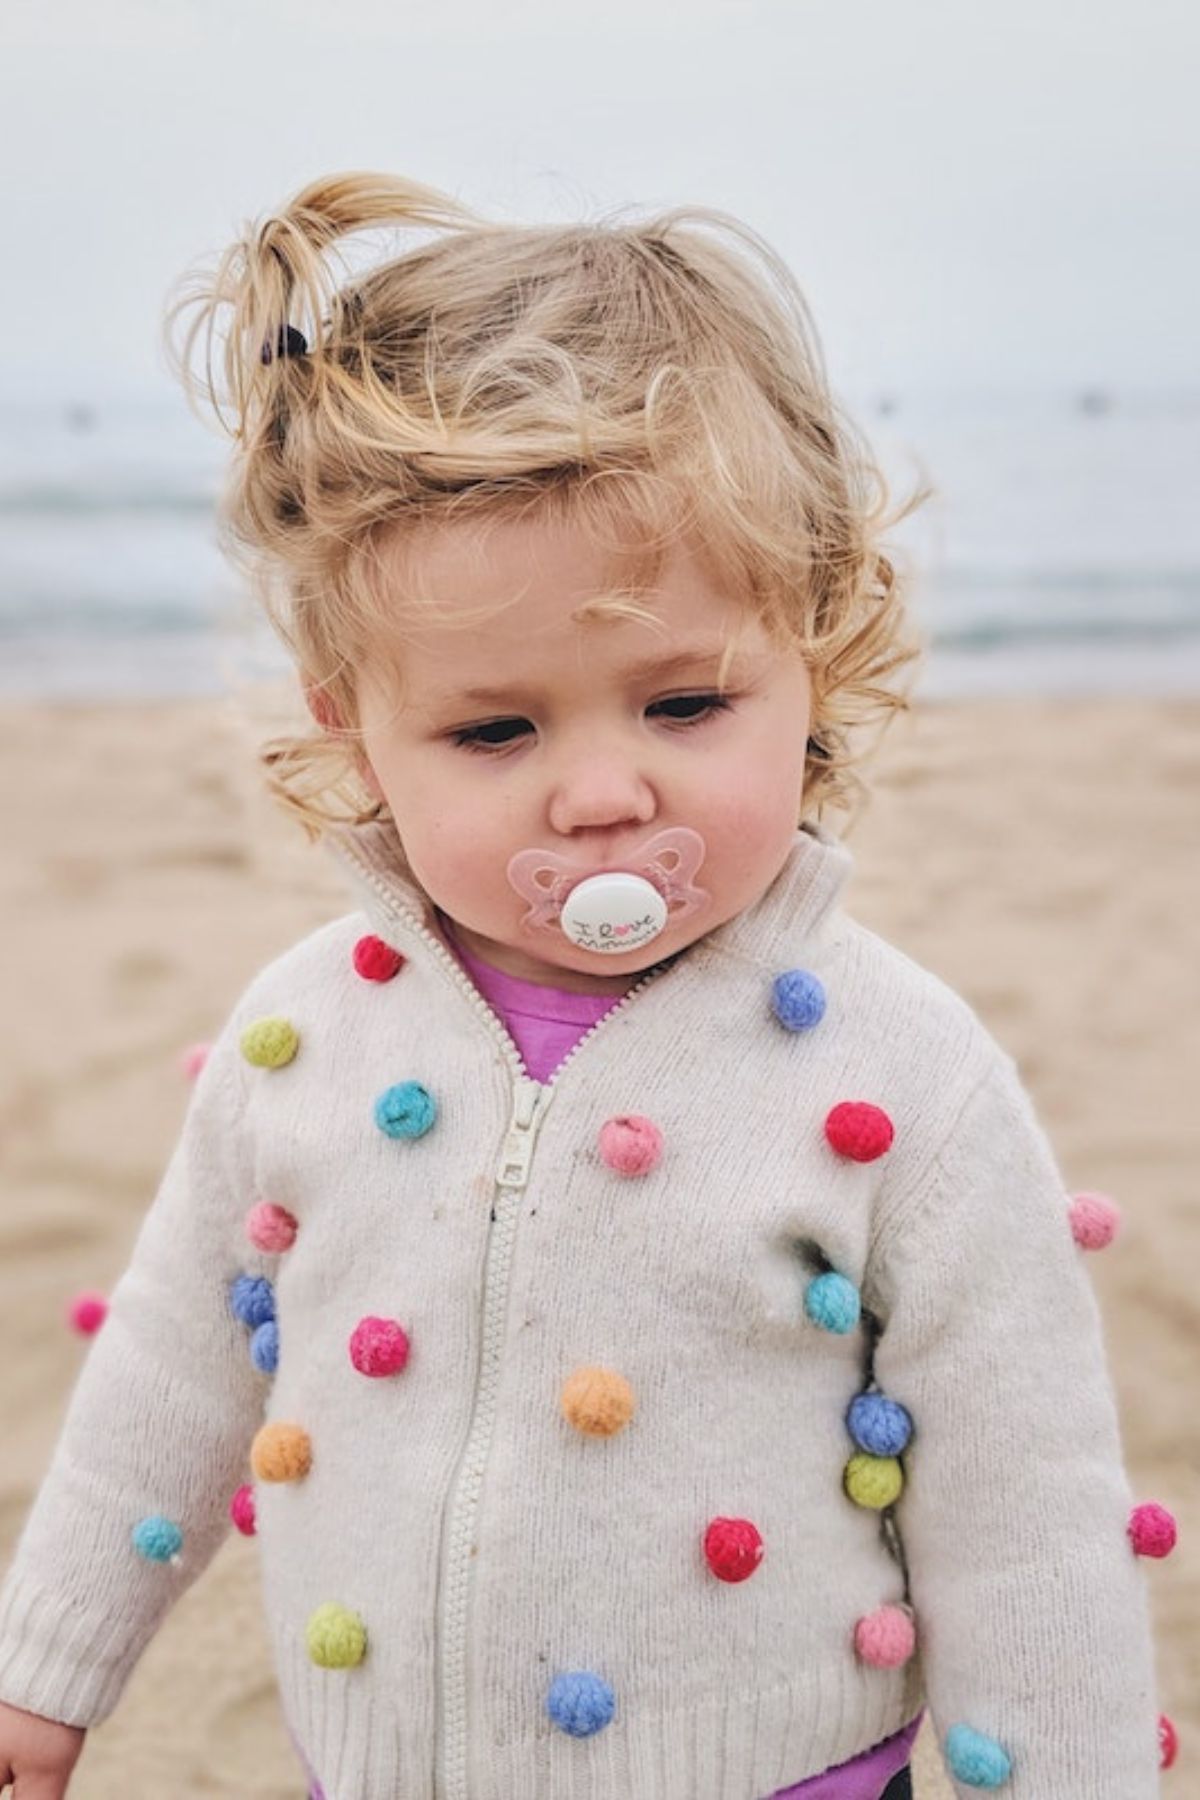 Toddler girl with a pacifier in her mouth walking on the beach.